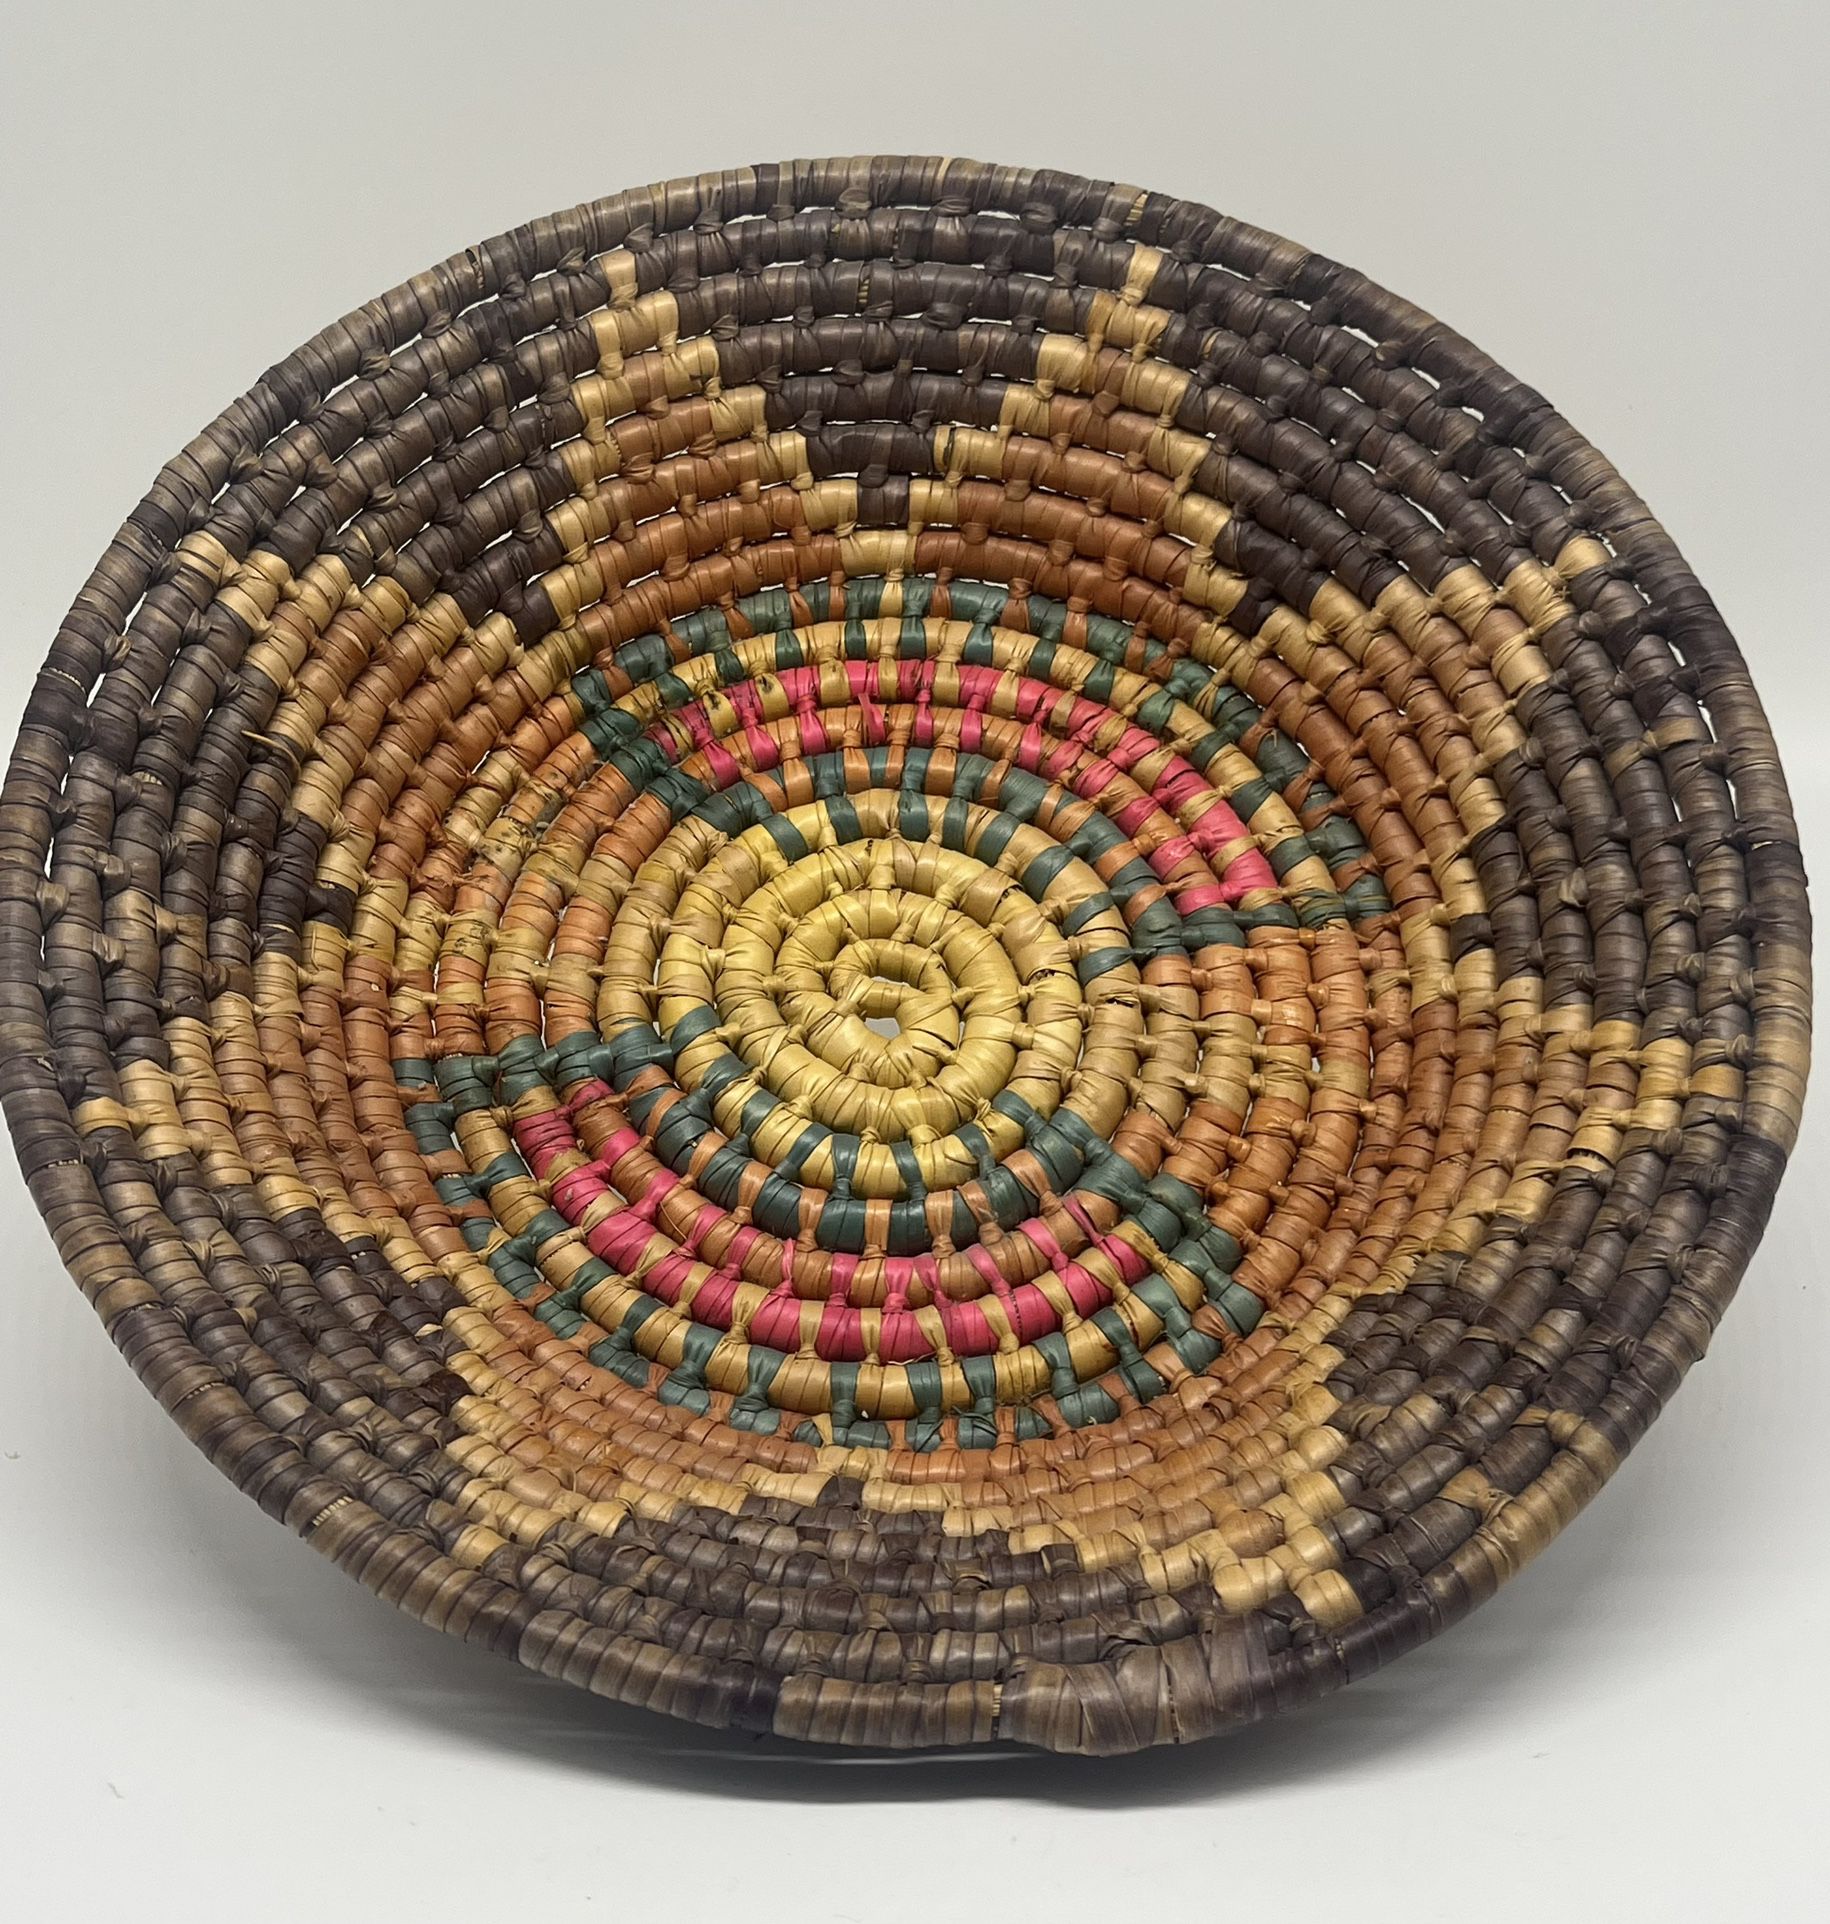 Hand Woven Coiled Basket Southwestern 11” Round